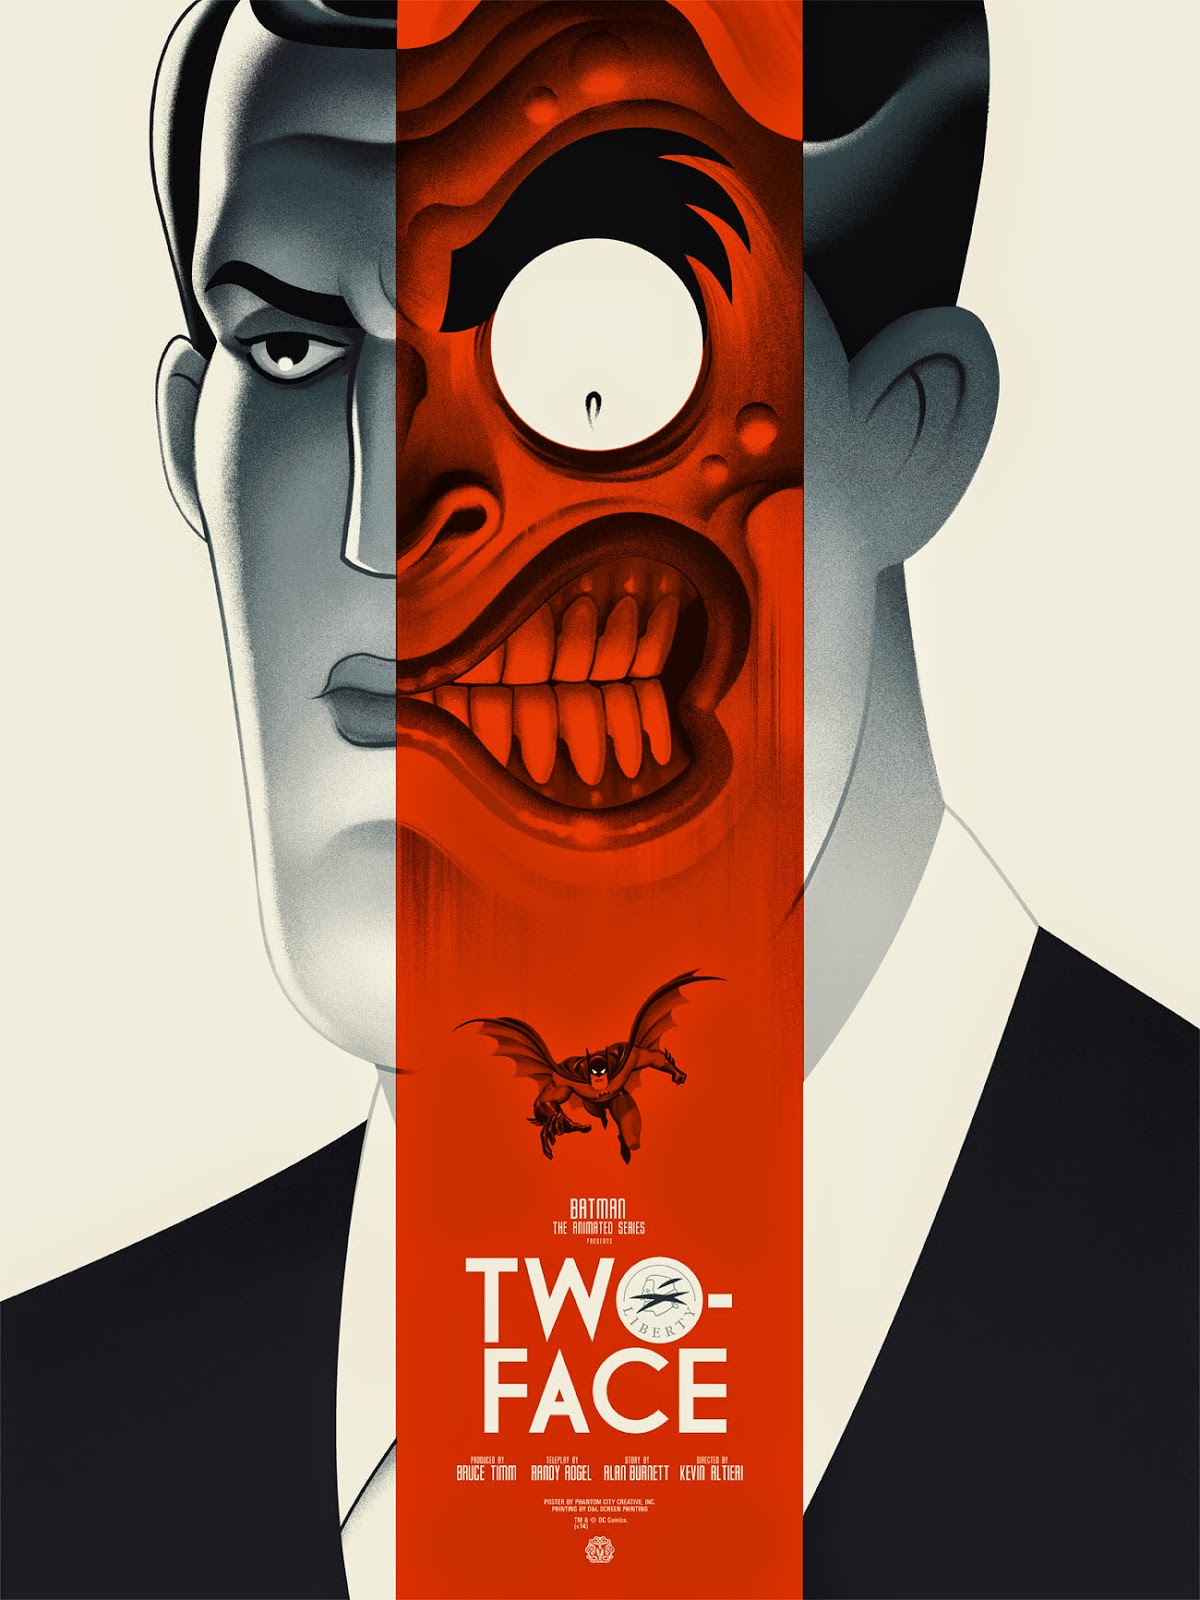 INSIDE THE ROCK POSTER FRAME BLOG: Batman The Animated Series Two Face  Poster by Phantom City Creative Artist Edition Release Details